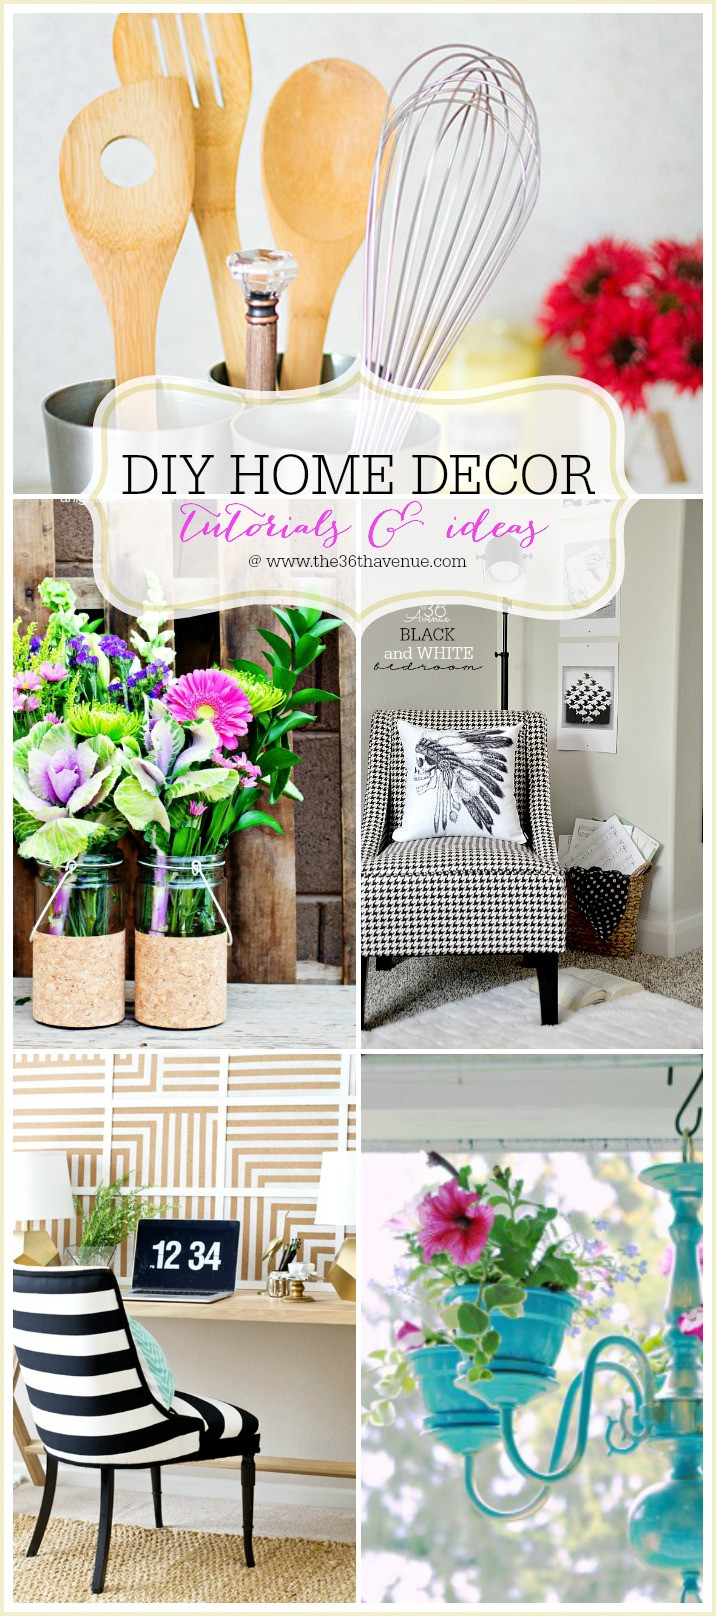 DIY Project Home Decor
 The 36th AVENUE Home Decor DIY Projects